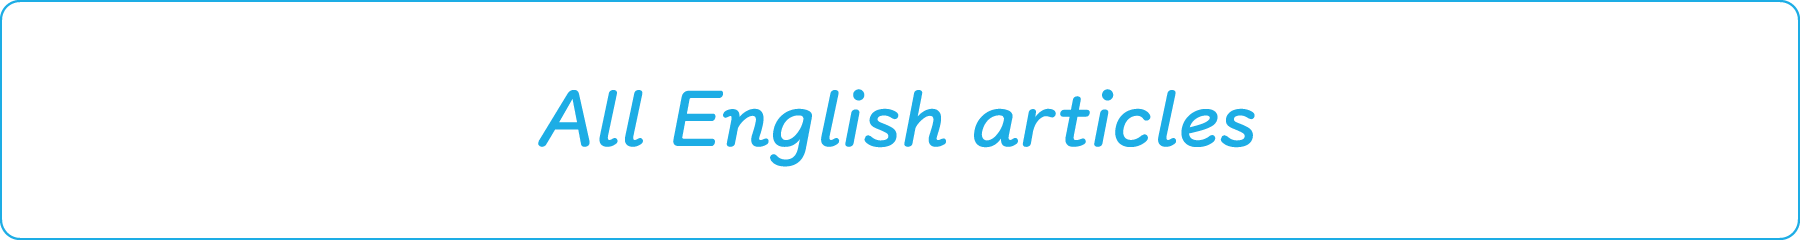 All English articles